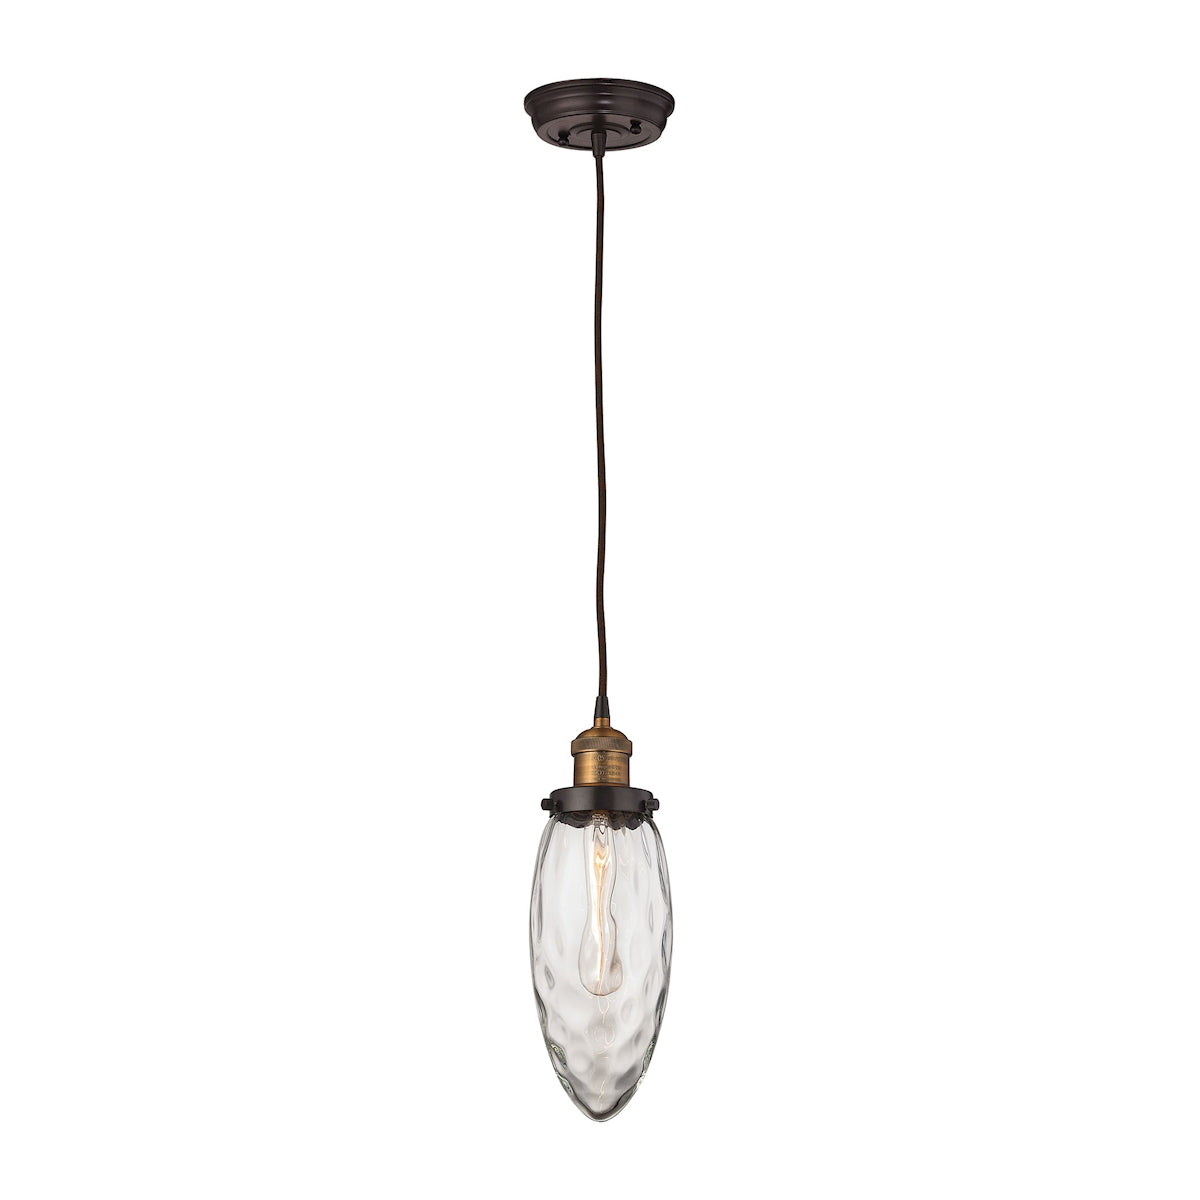 ELK Lighting 16310/1 Owen 1-Light Mini Pendant in Antique Brass and Oil Rubbed Bronze with Water Glass